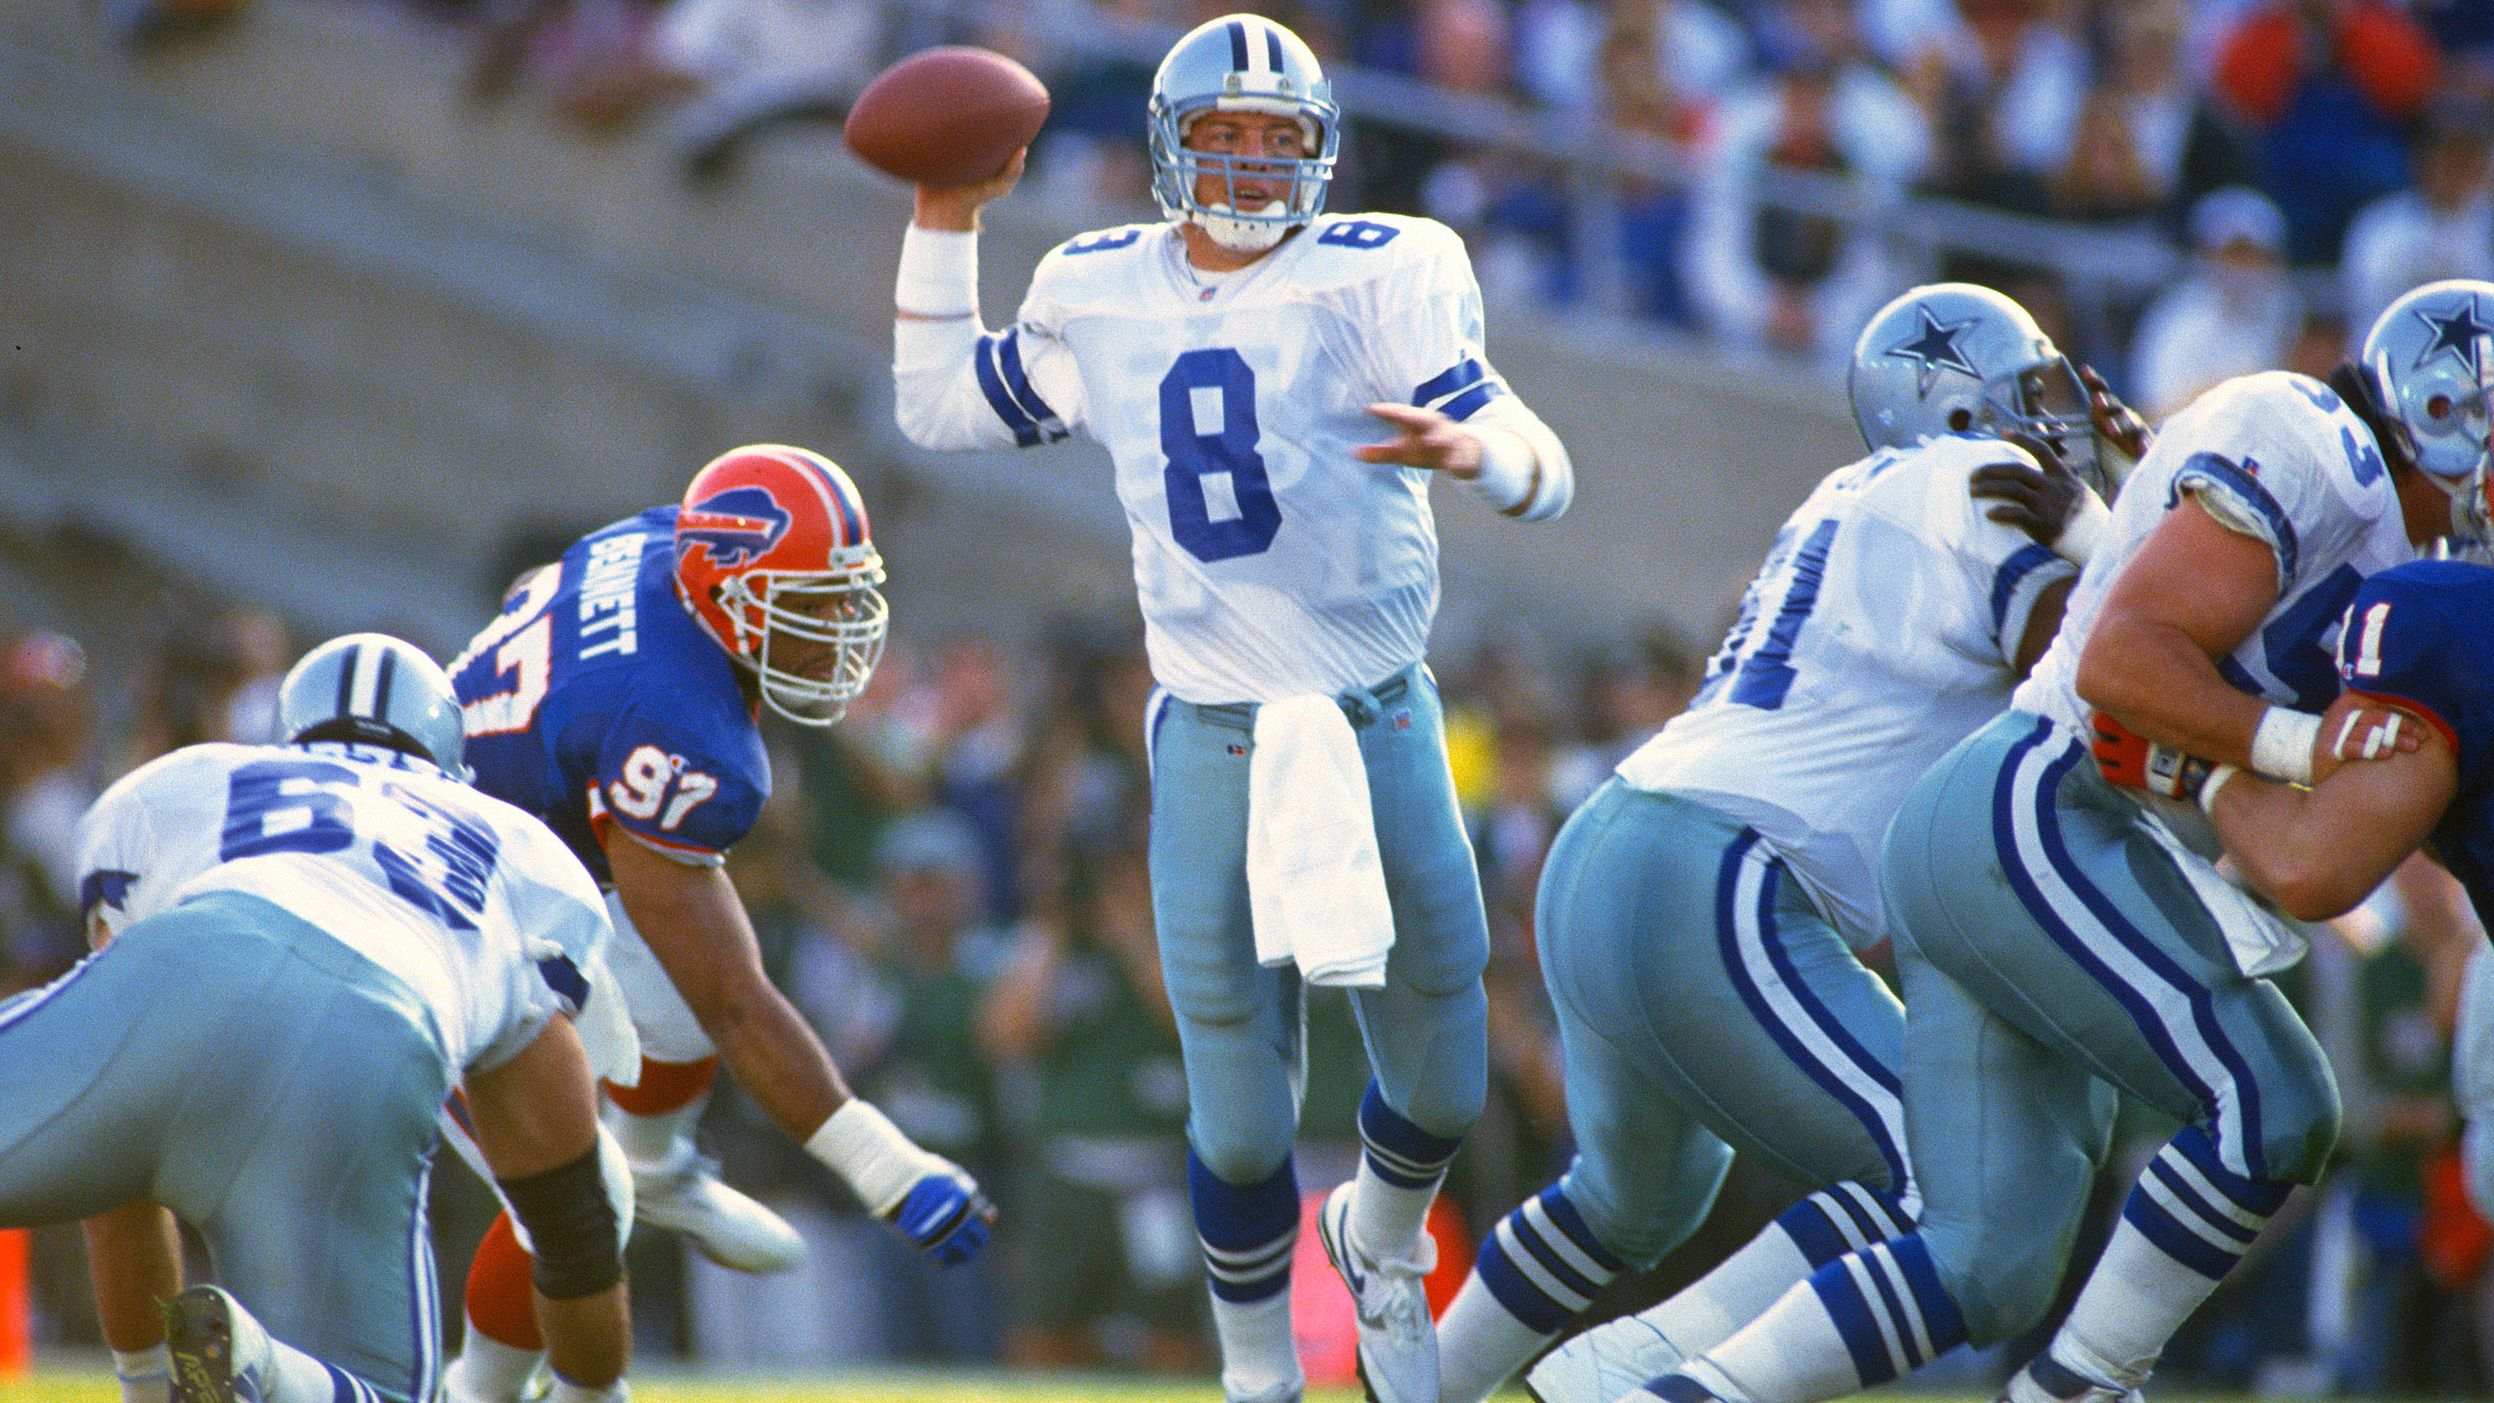 <strong>Super Bowl XXVII (1993): </strong>Dallas quarterback Troy Aikman had 273 yards and four touchdowns as the Cowboys won their first Super Bowl since 1978. Dallas trounced Buffalo 52-17, handing the Bills their third straight Super Bowl loss.